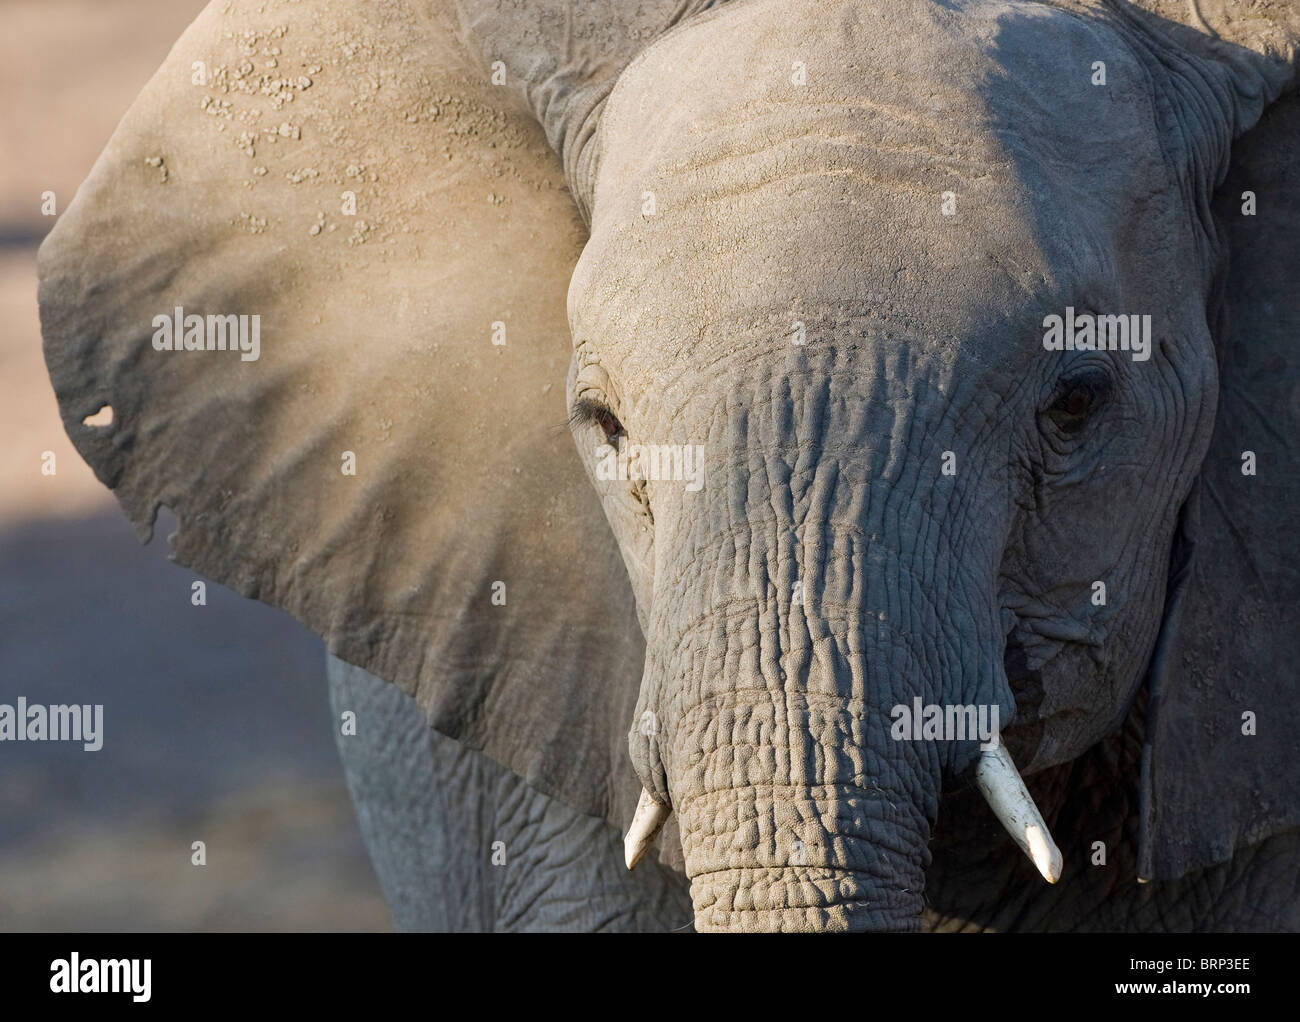 African elephant portrait of a young animal Stock Photo